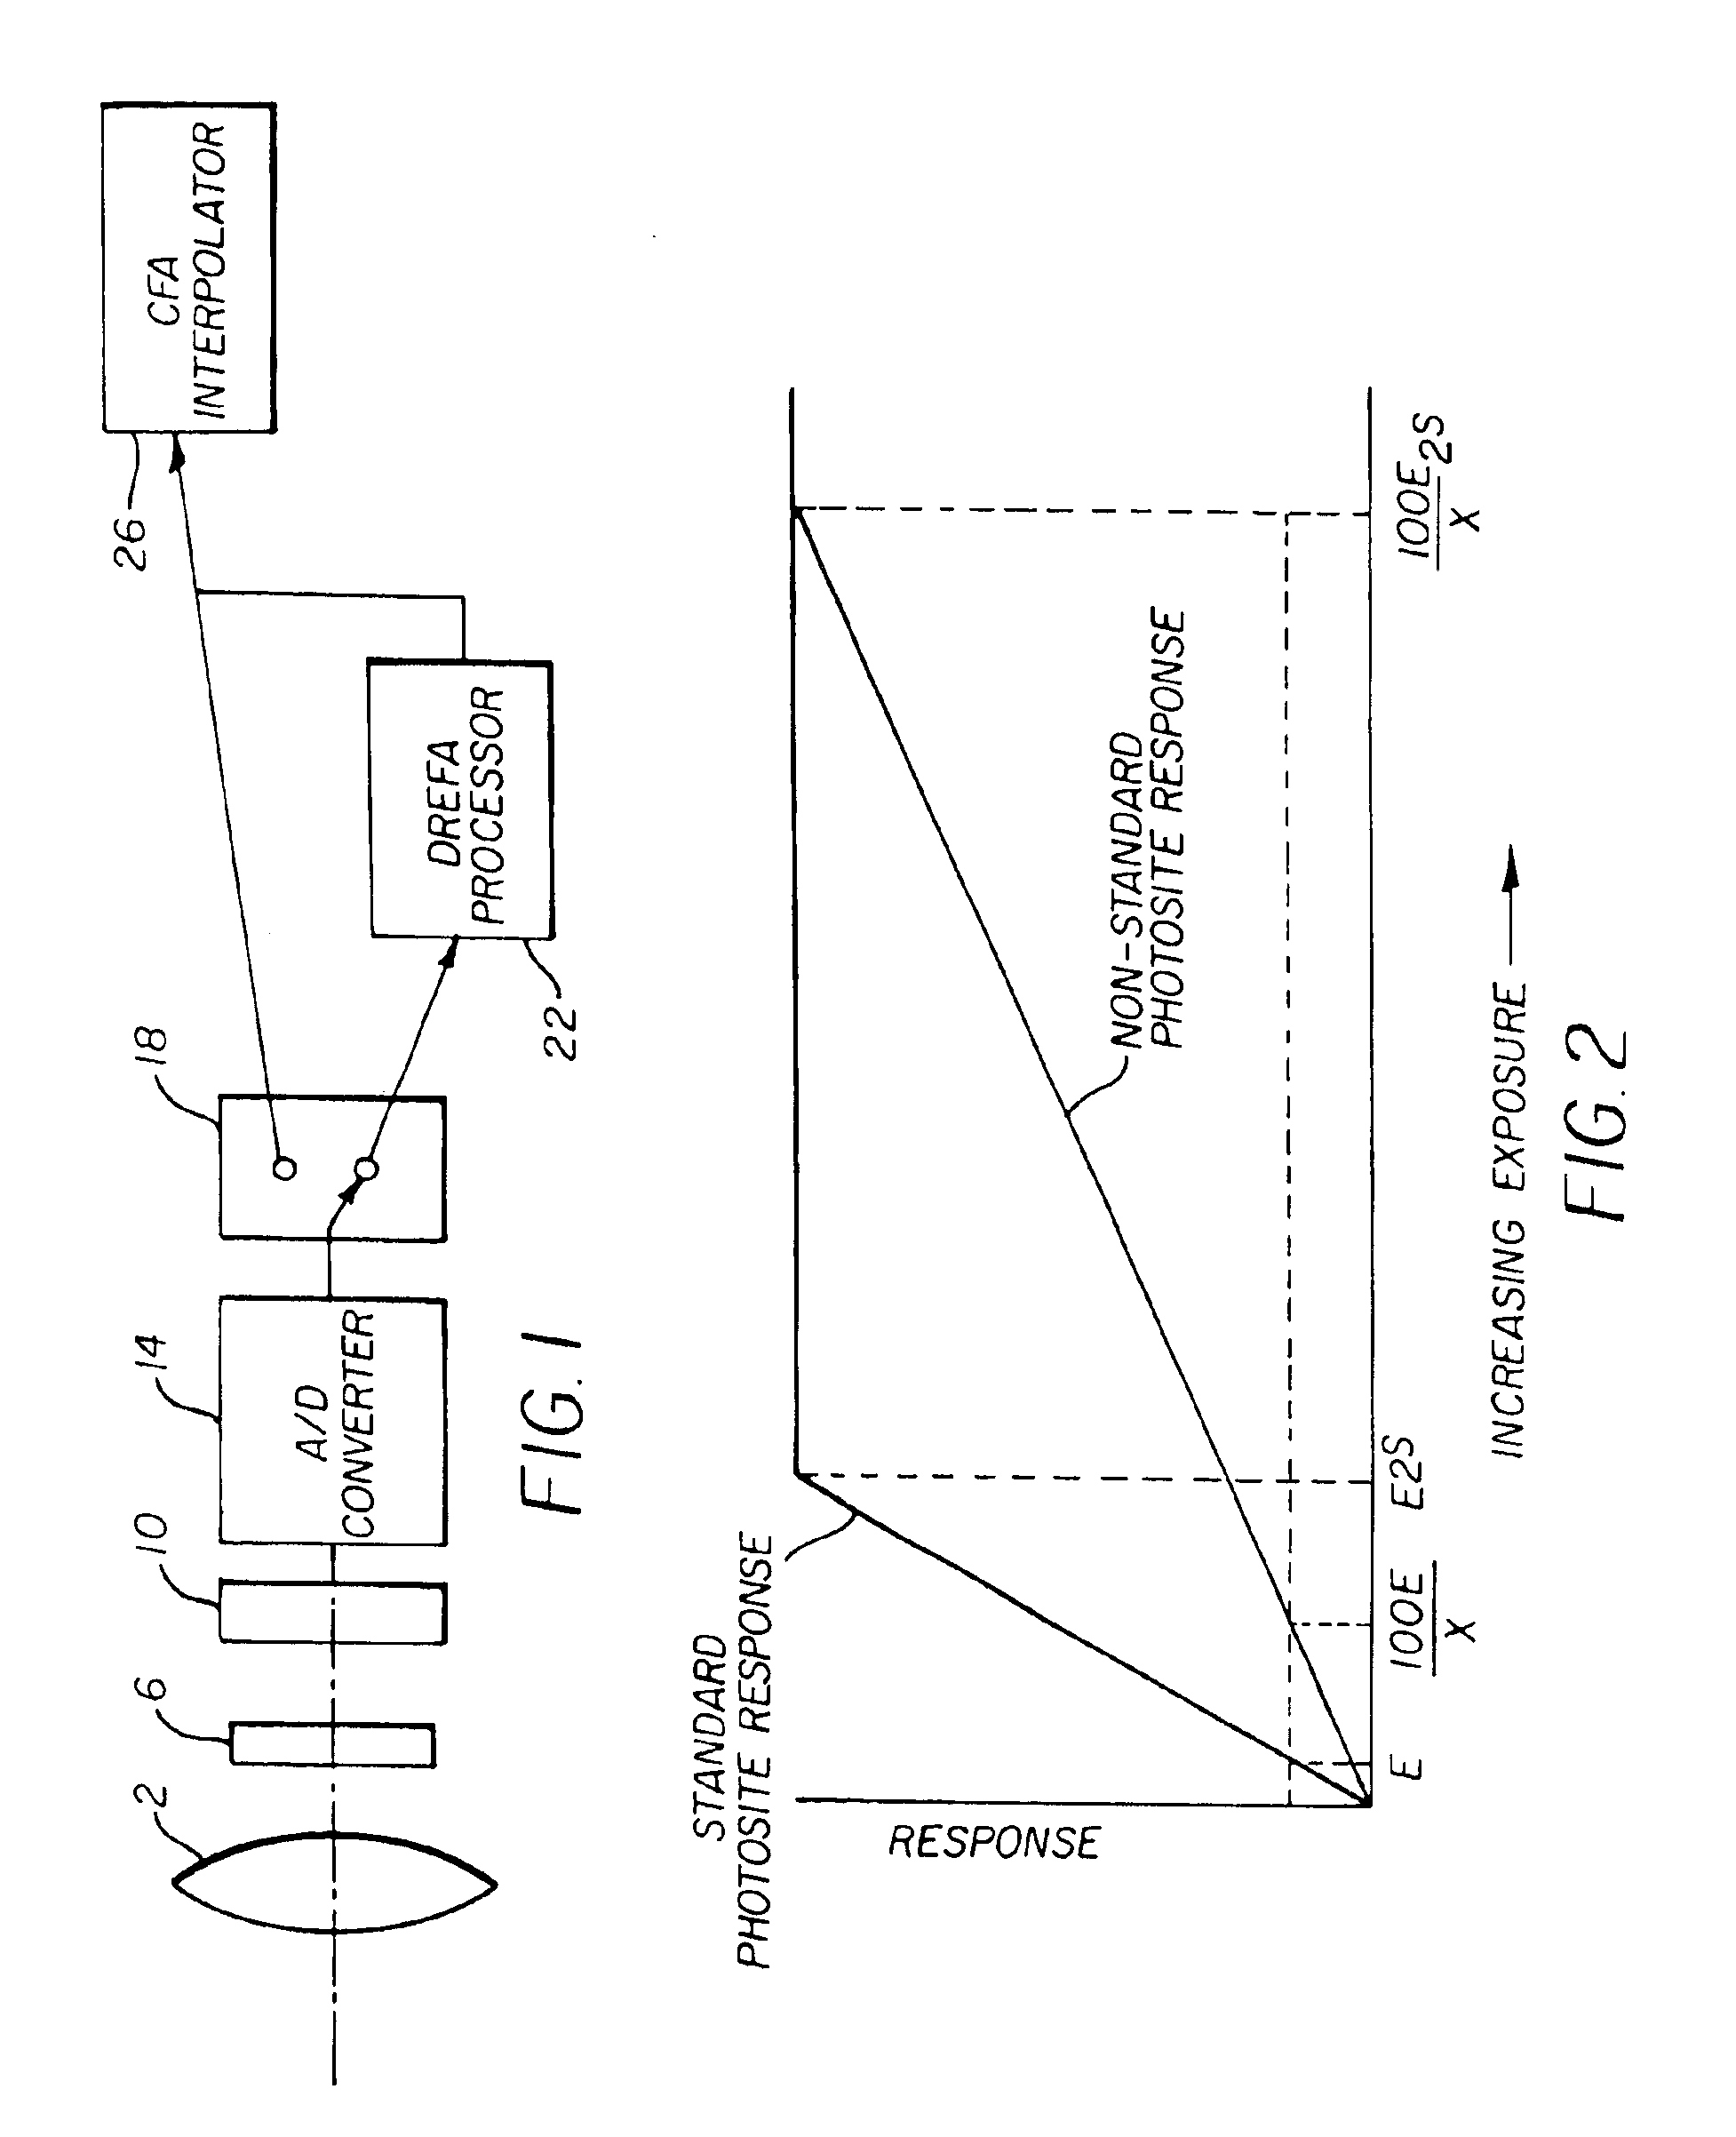 Method and apparatus to extend the effective dynamic range of an image sensing device